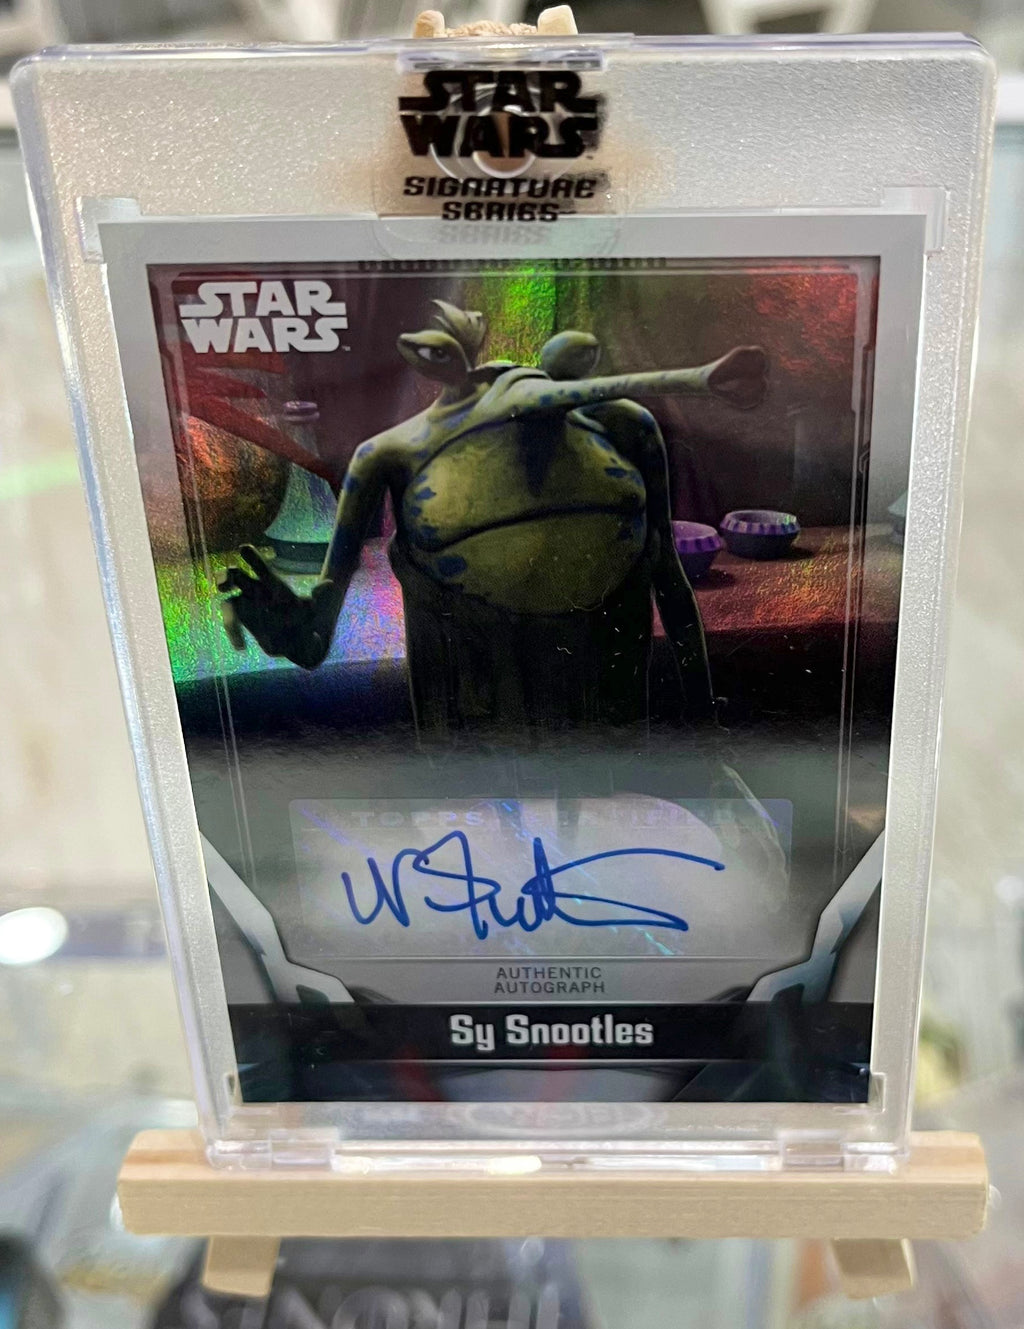 Star Wars Topps Authentic Autograph Card - Nika Futterman as Sy Snootles